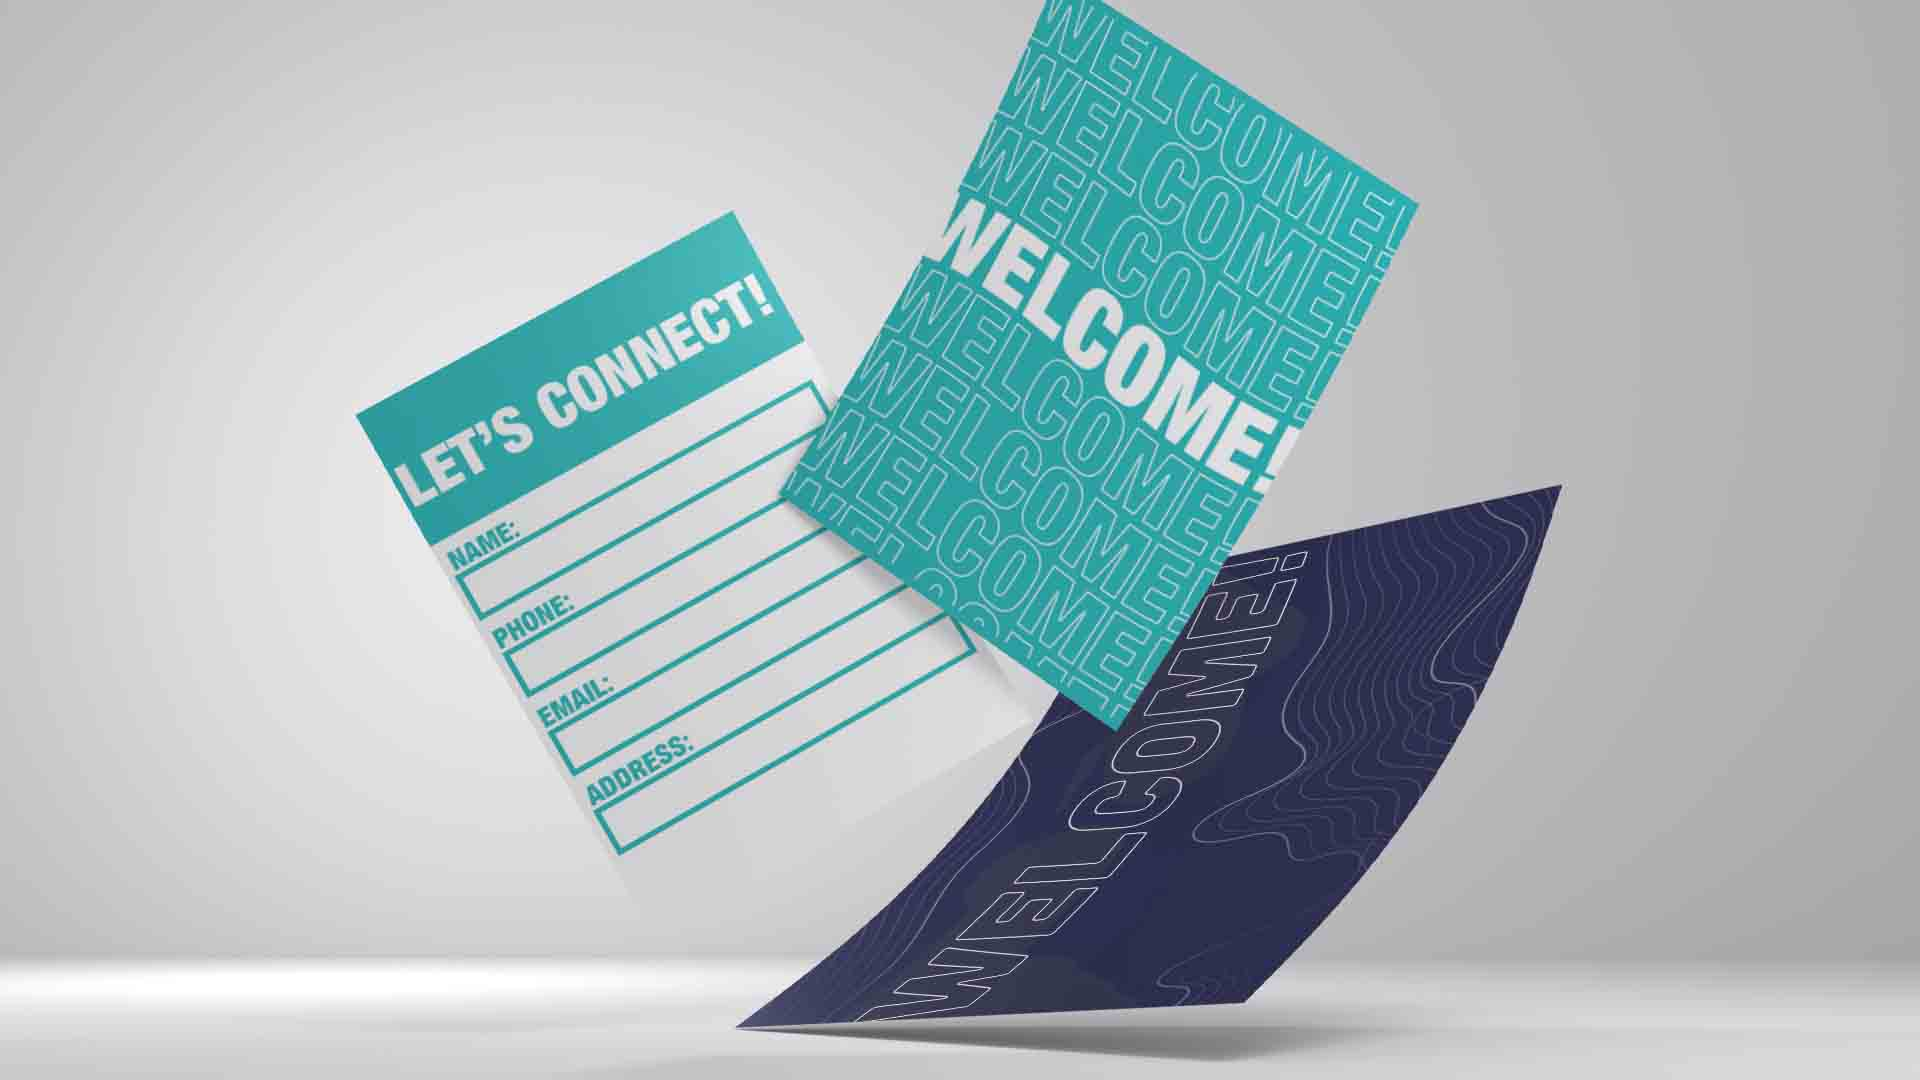 sample welcome speech for a church event